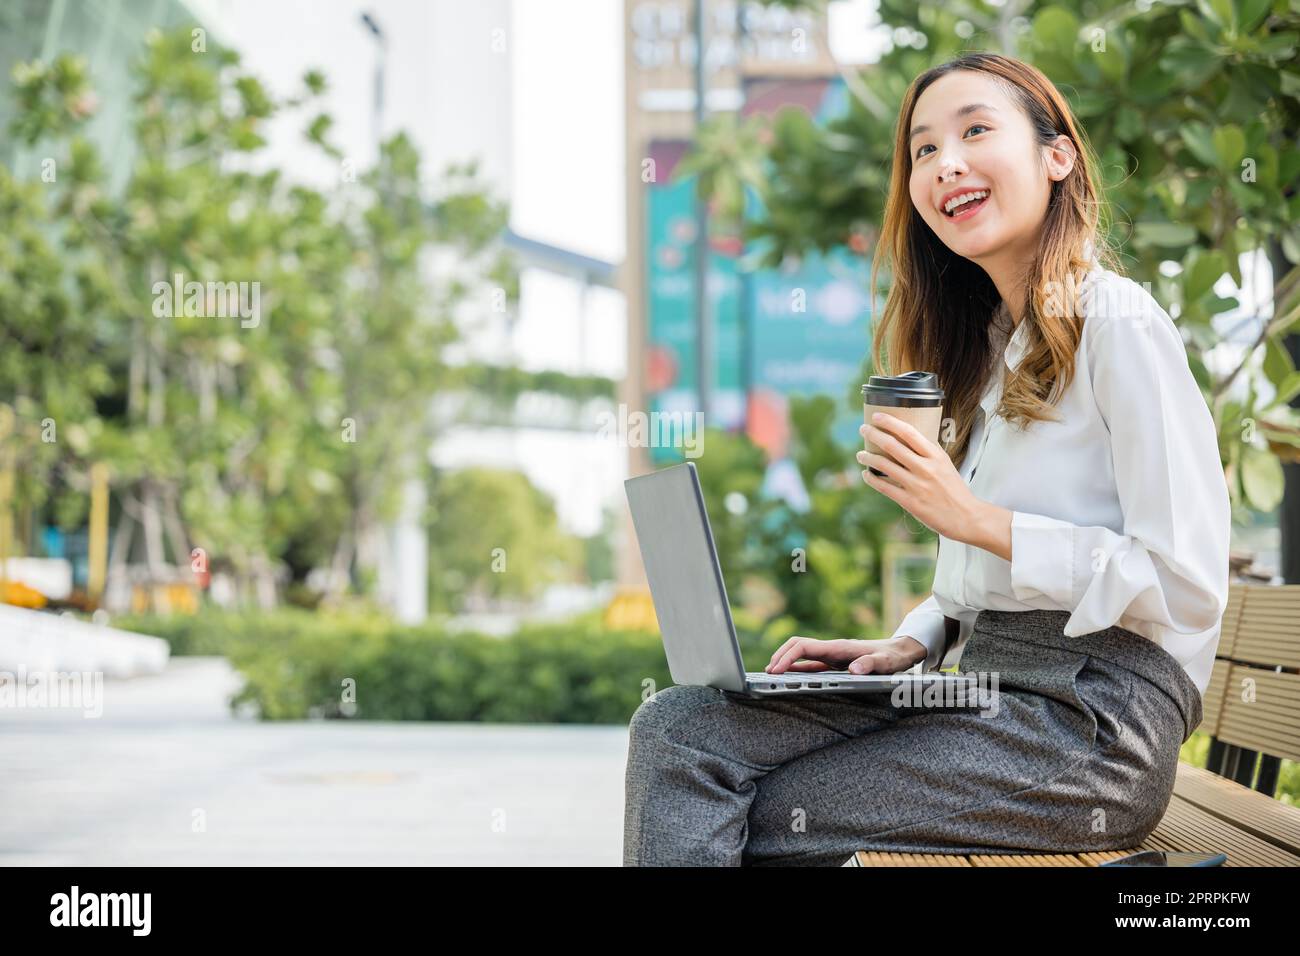 Happy Asian professional smiling businesswoman sitting alone typing computer outside street city Stock Photo